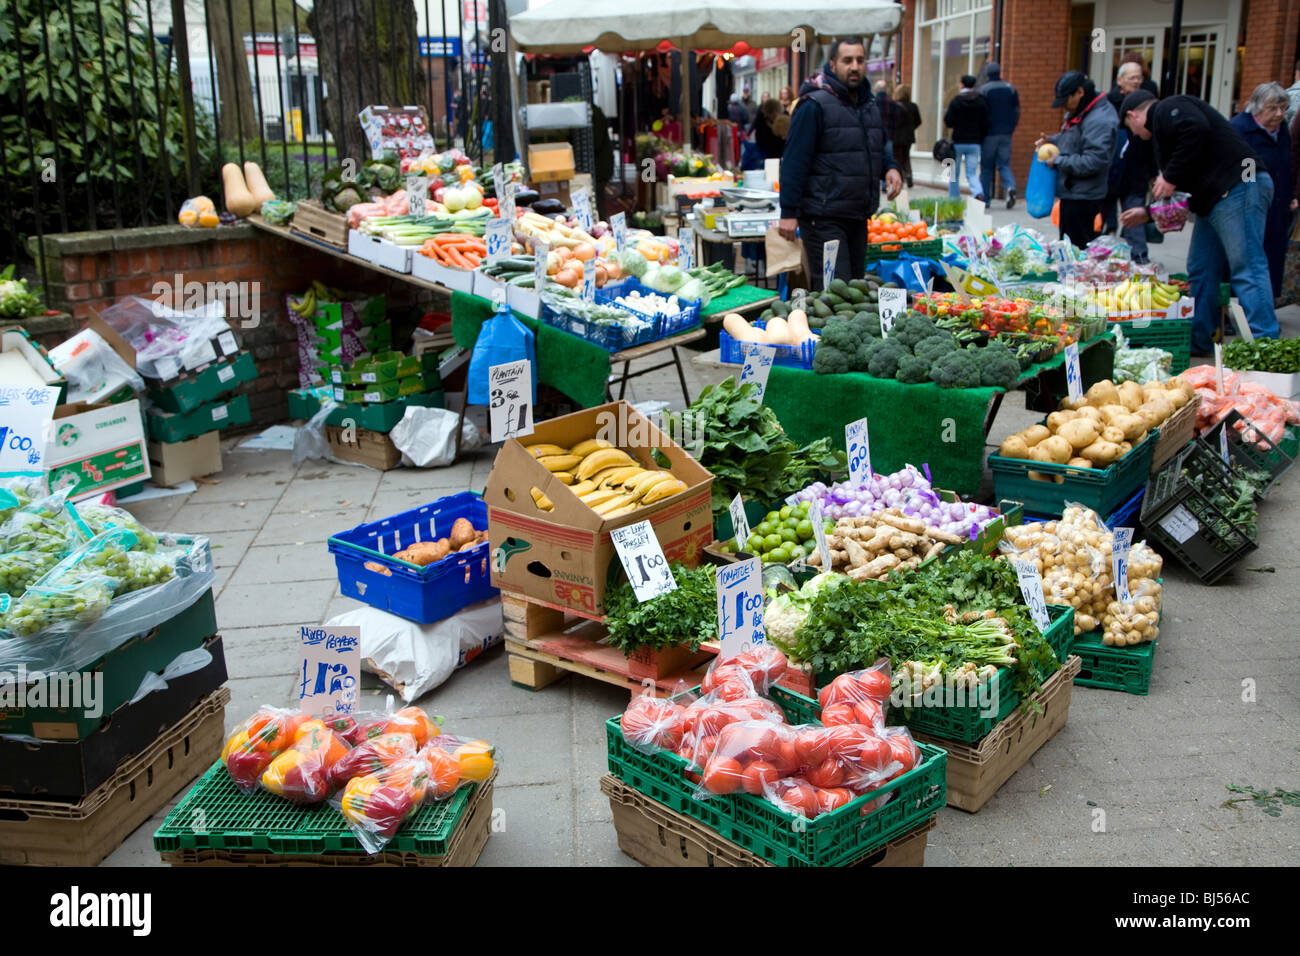 Street market with fruit and vegetables including exotic tropical varieties Stock Photo